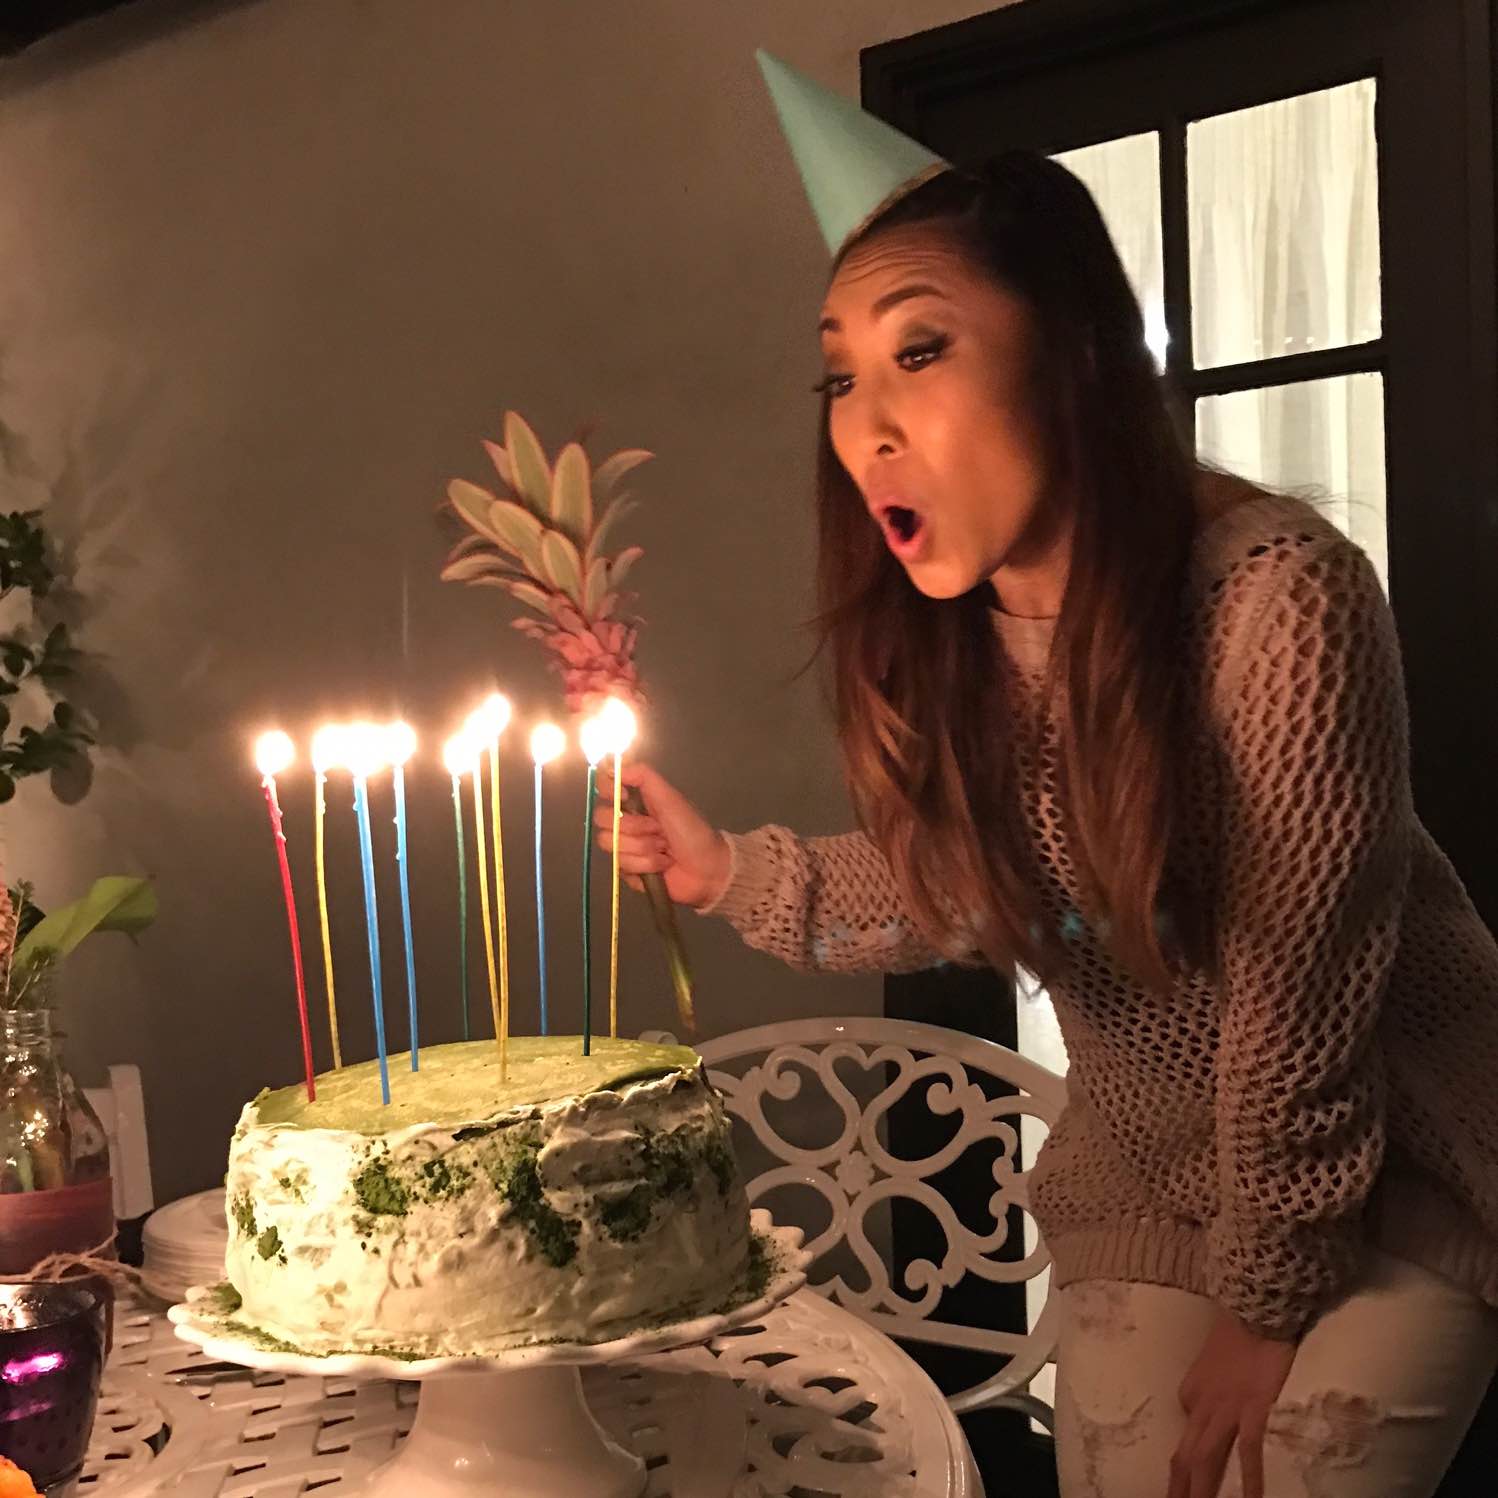 blowing candles